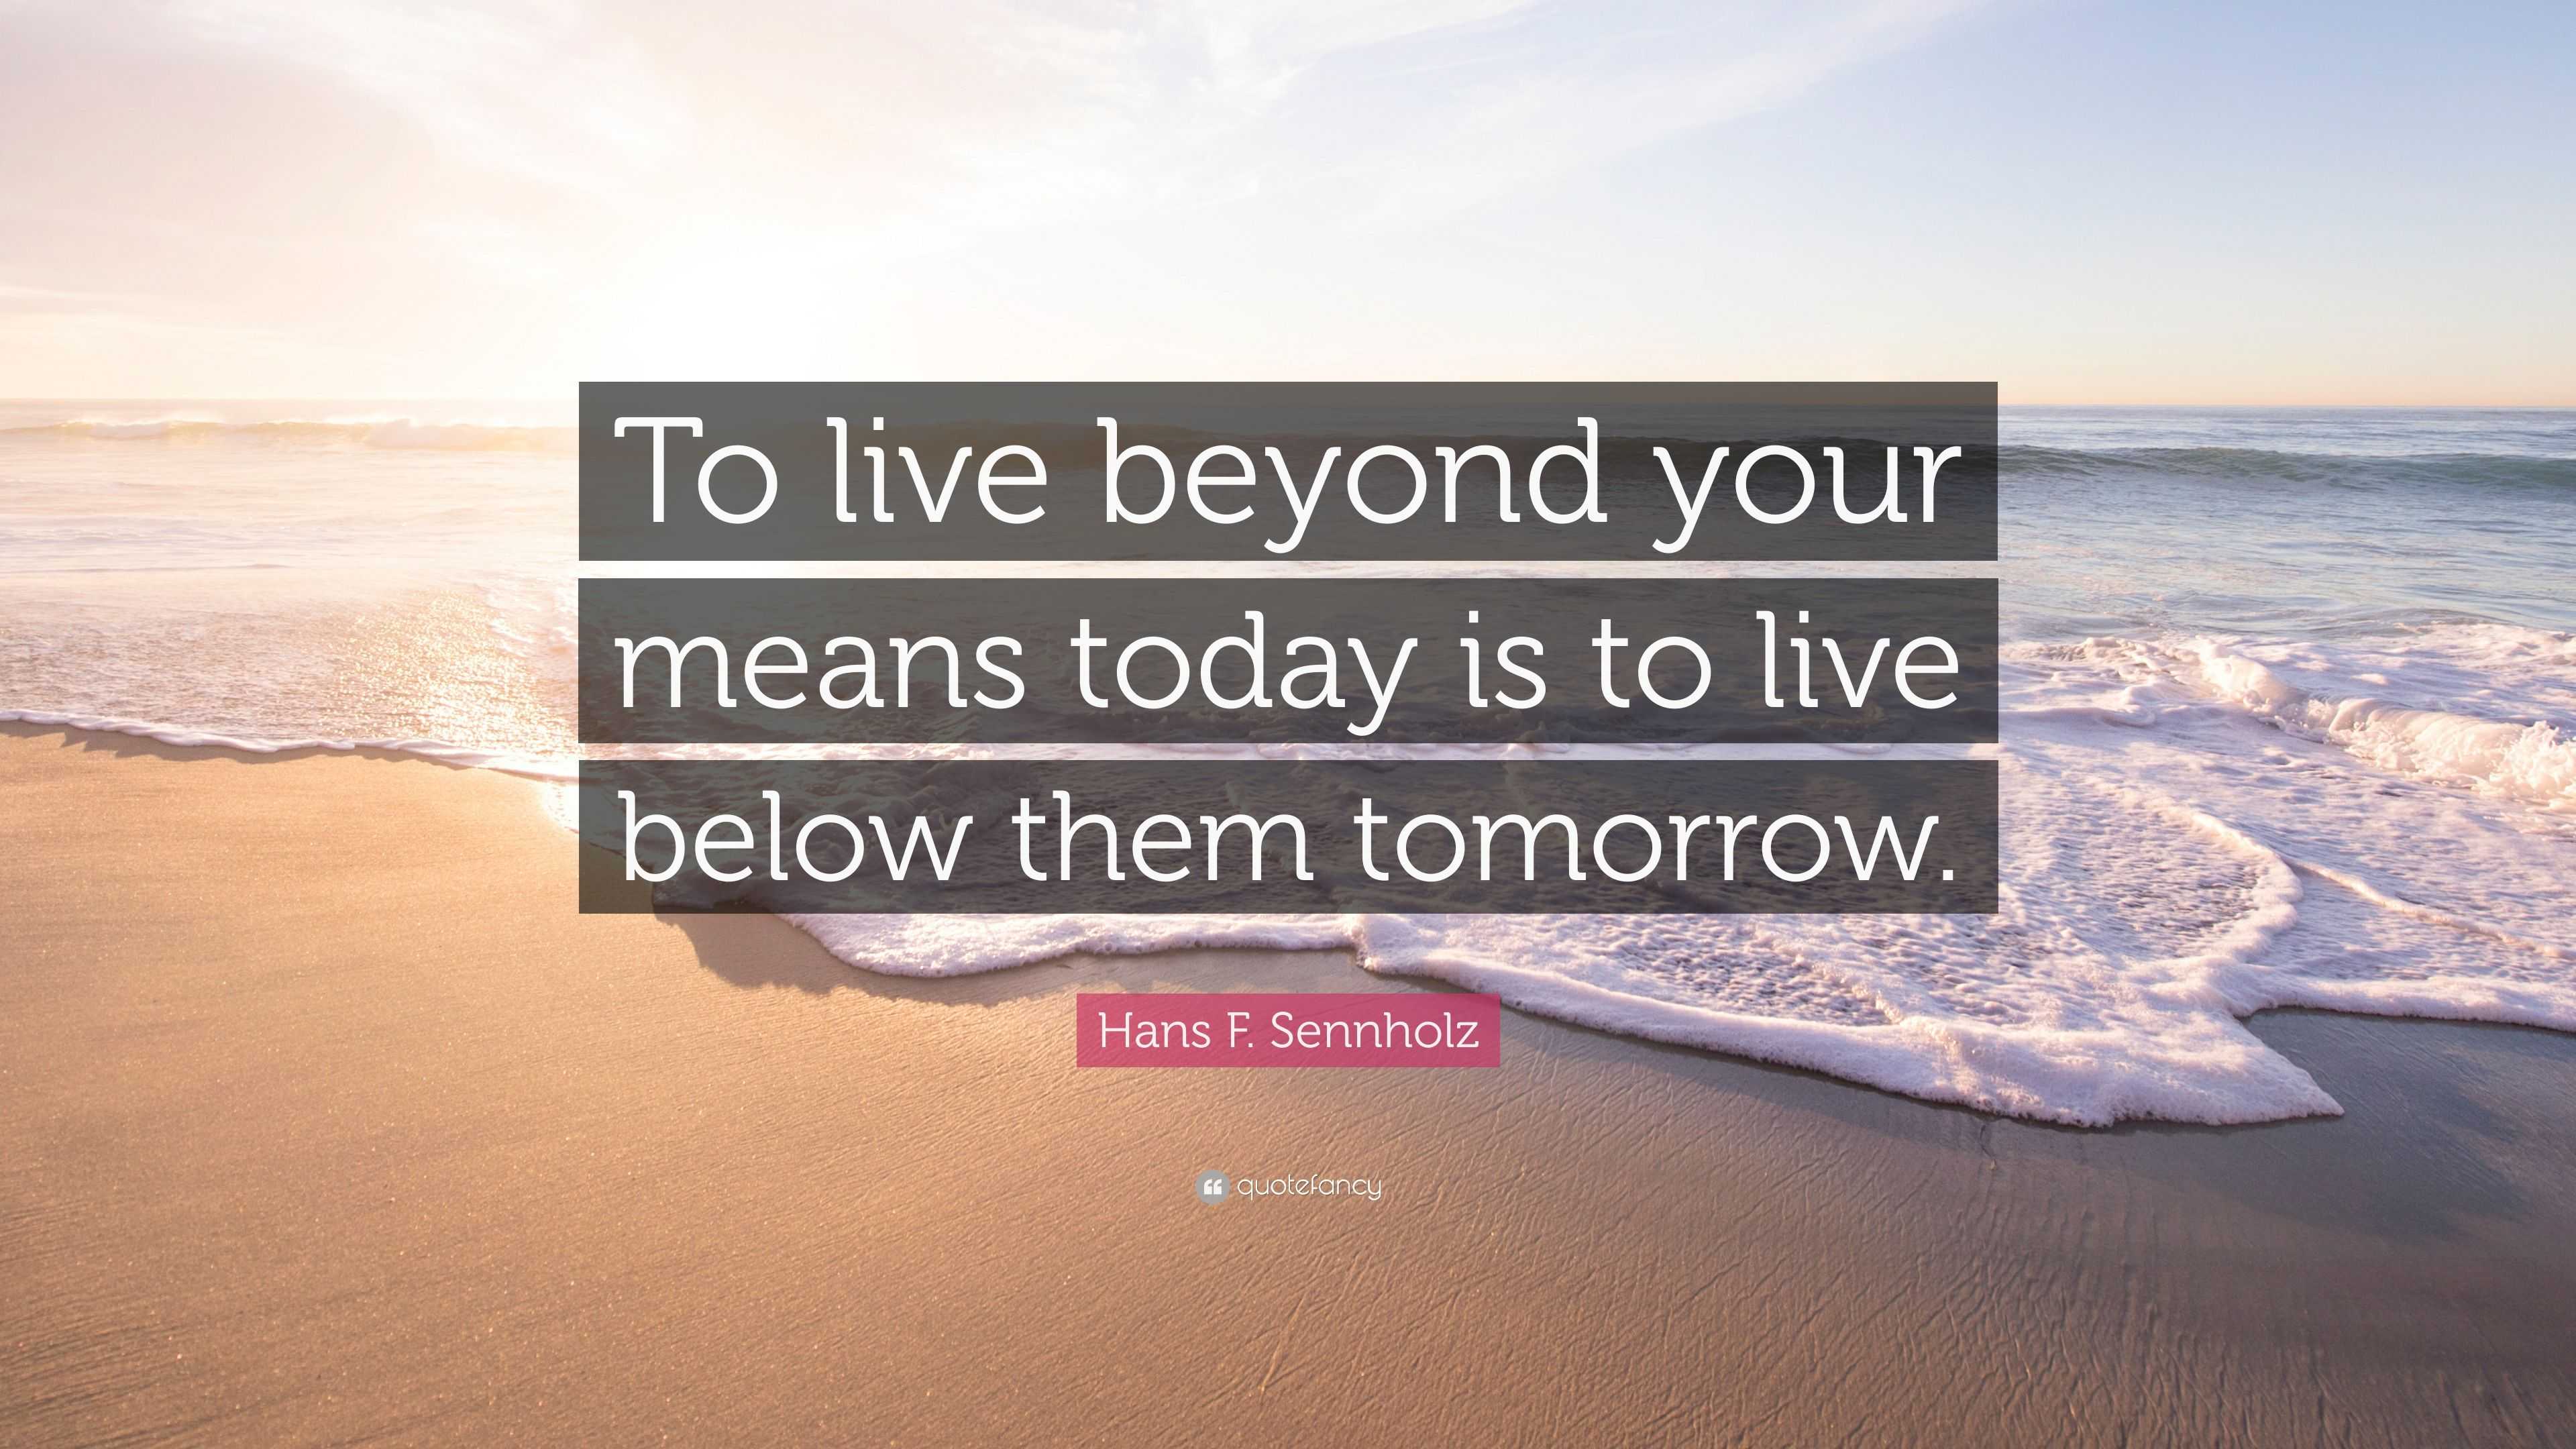 Hans F. Sennholz Quote “To live beyond your means today is to live